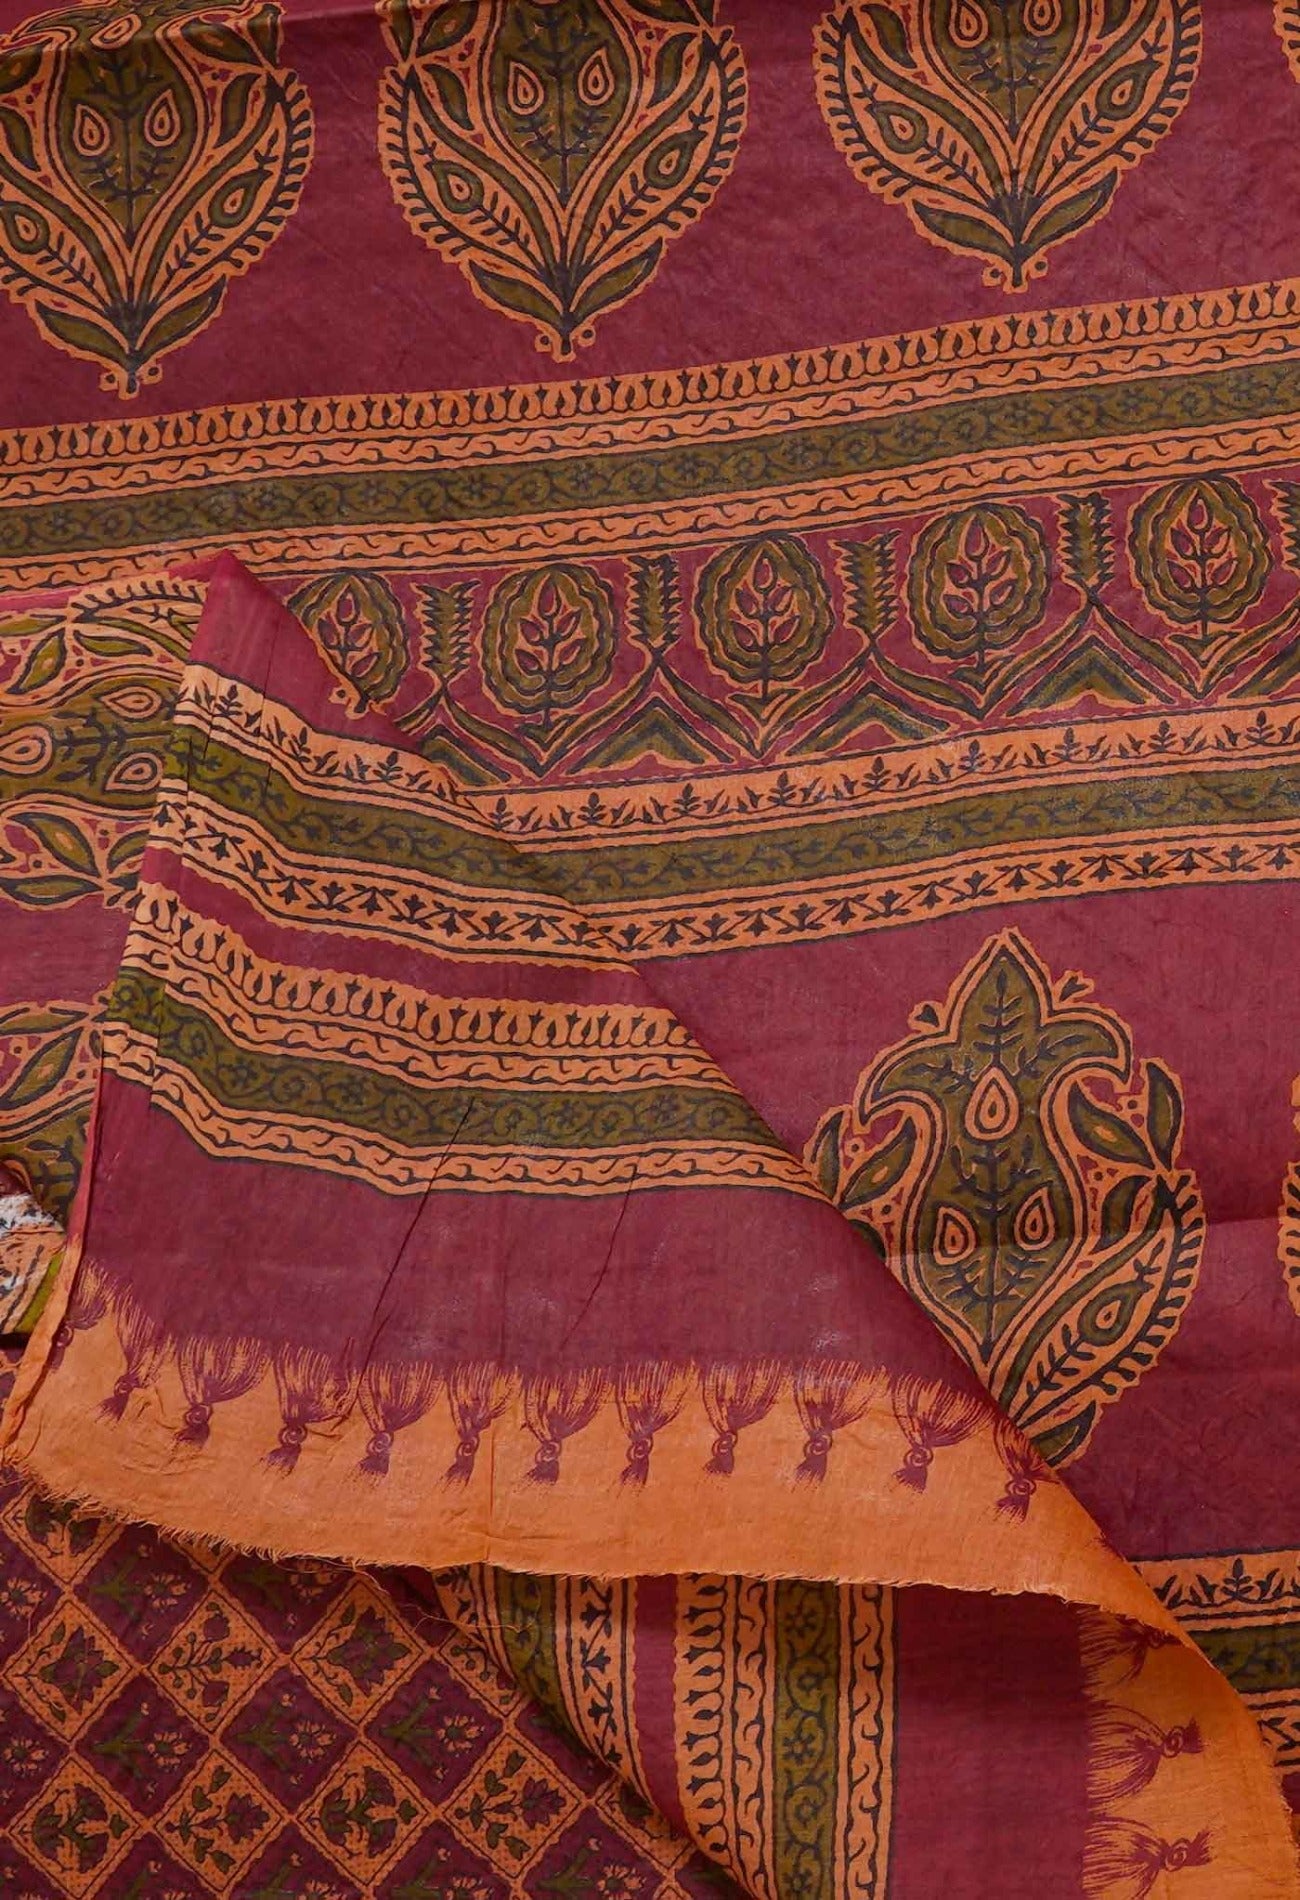 Online Shopping for Multi Pure Krisha Block Printed  Cotton Saree with Hand Block Prints from Rajasthan at Unnatisilks.com India
